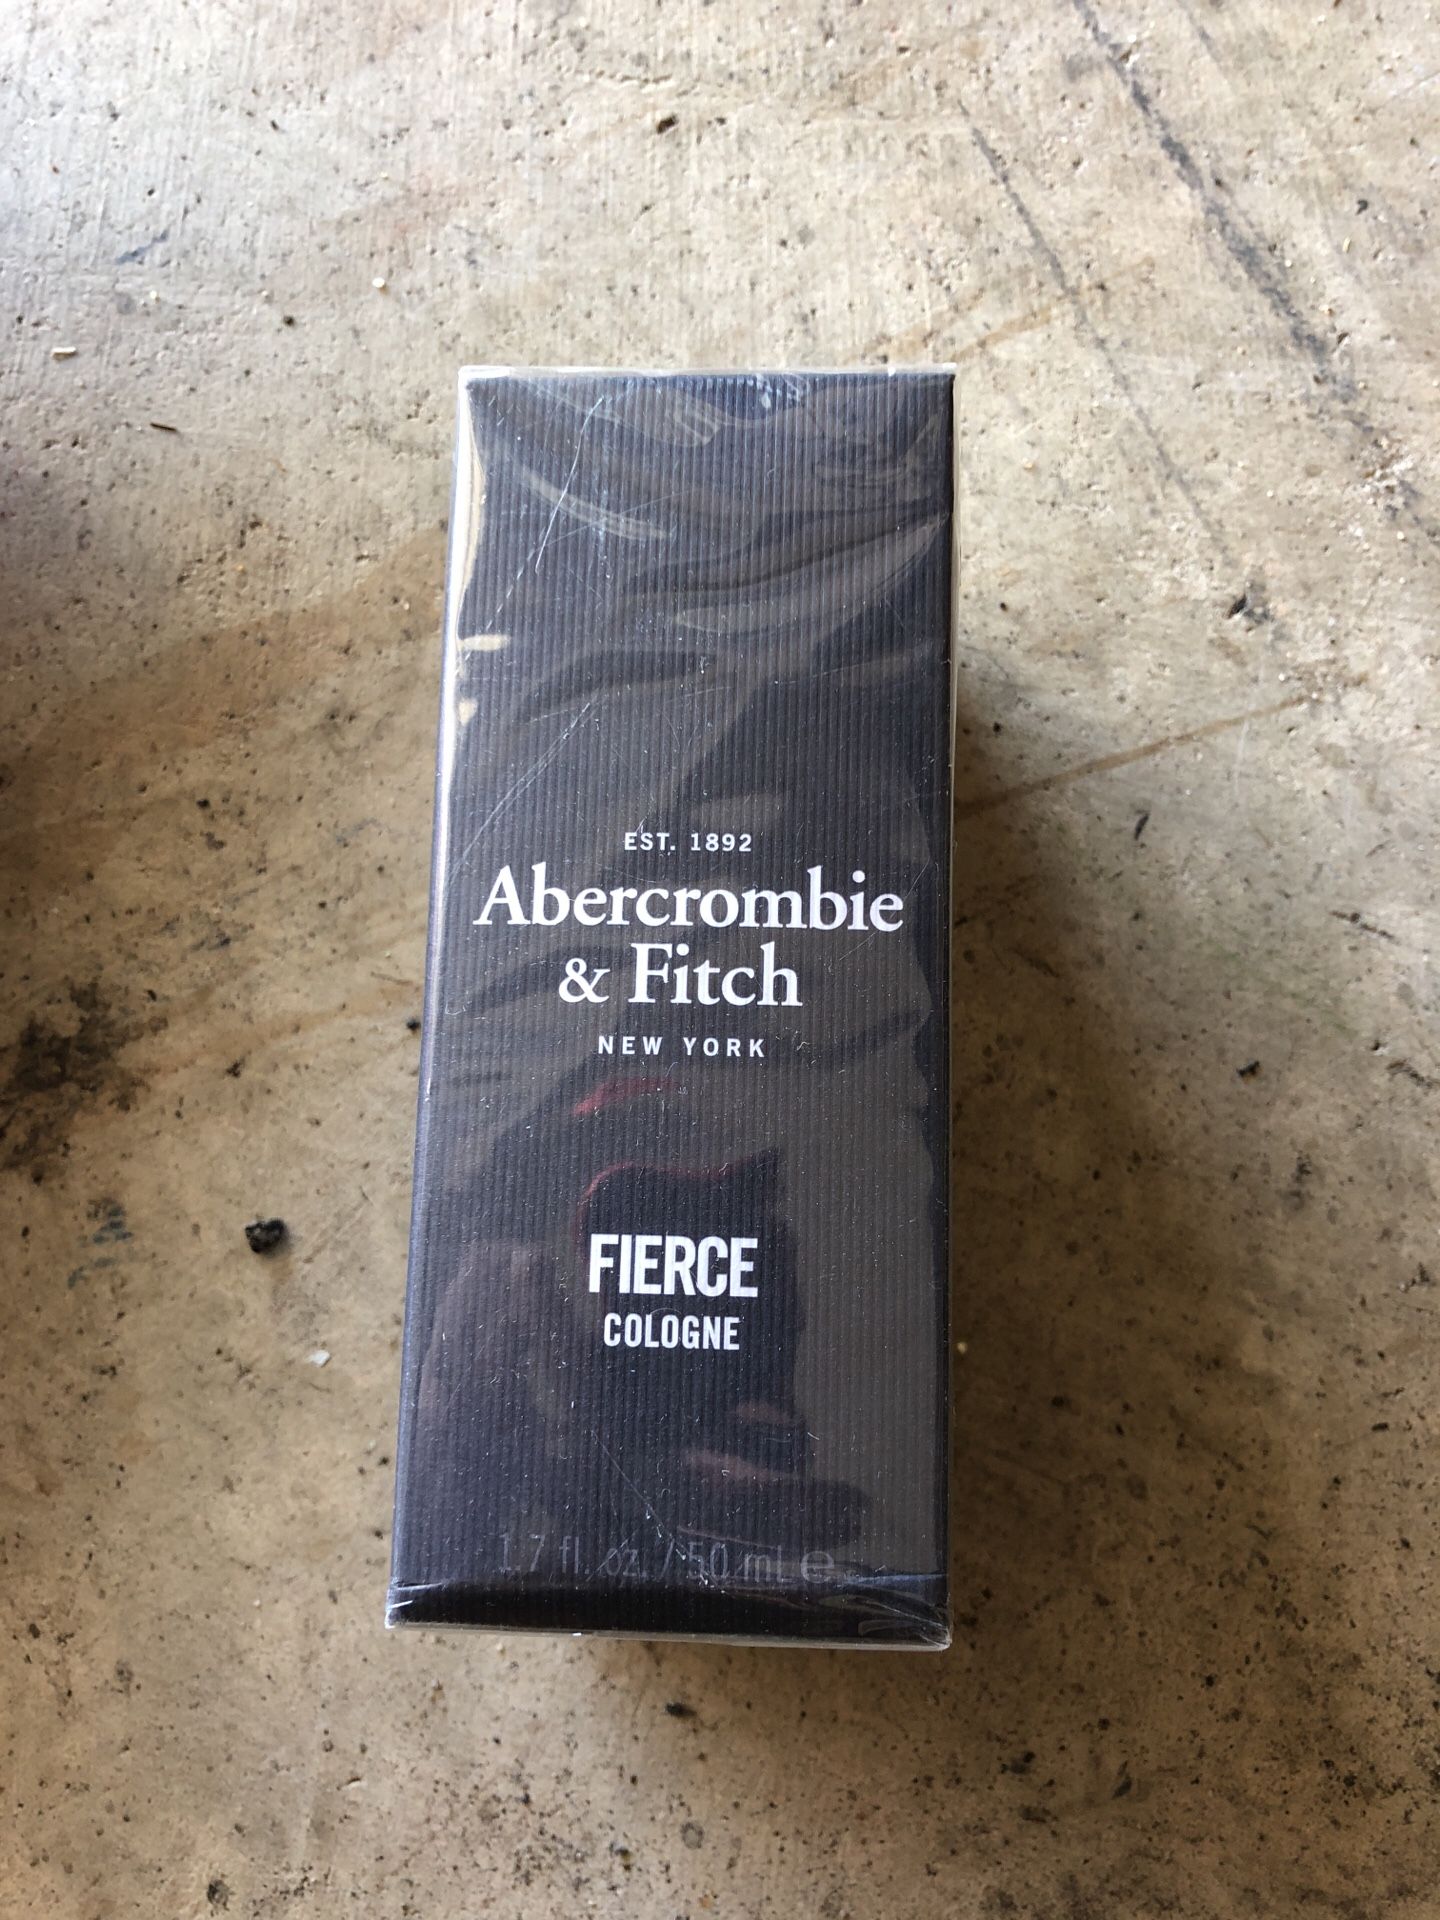 Abercrombie & Fitch fierce cologne